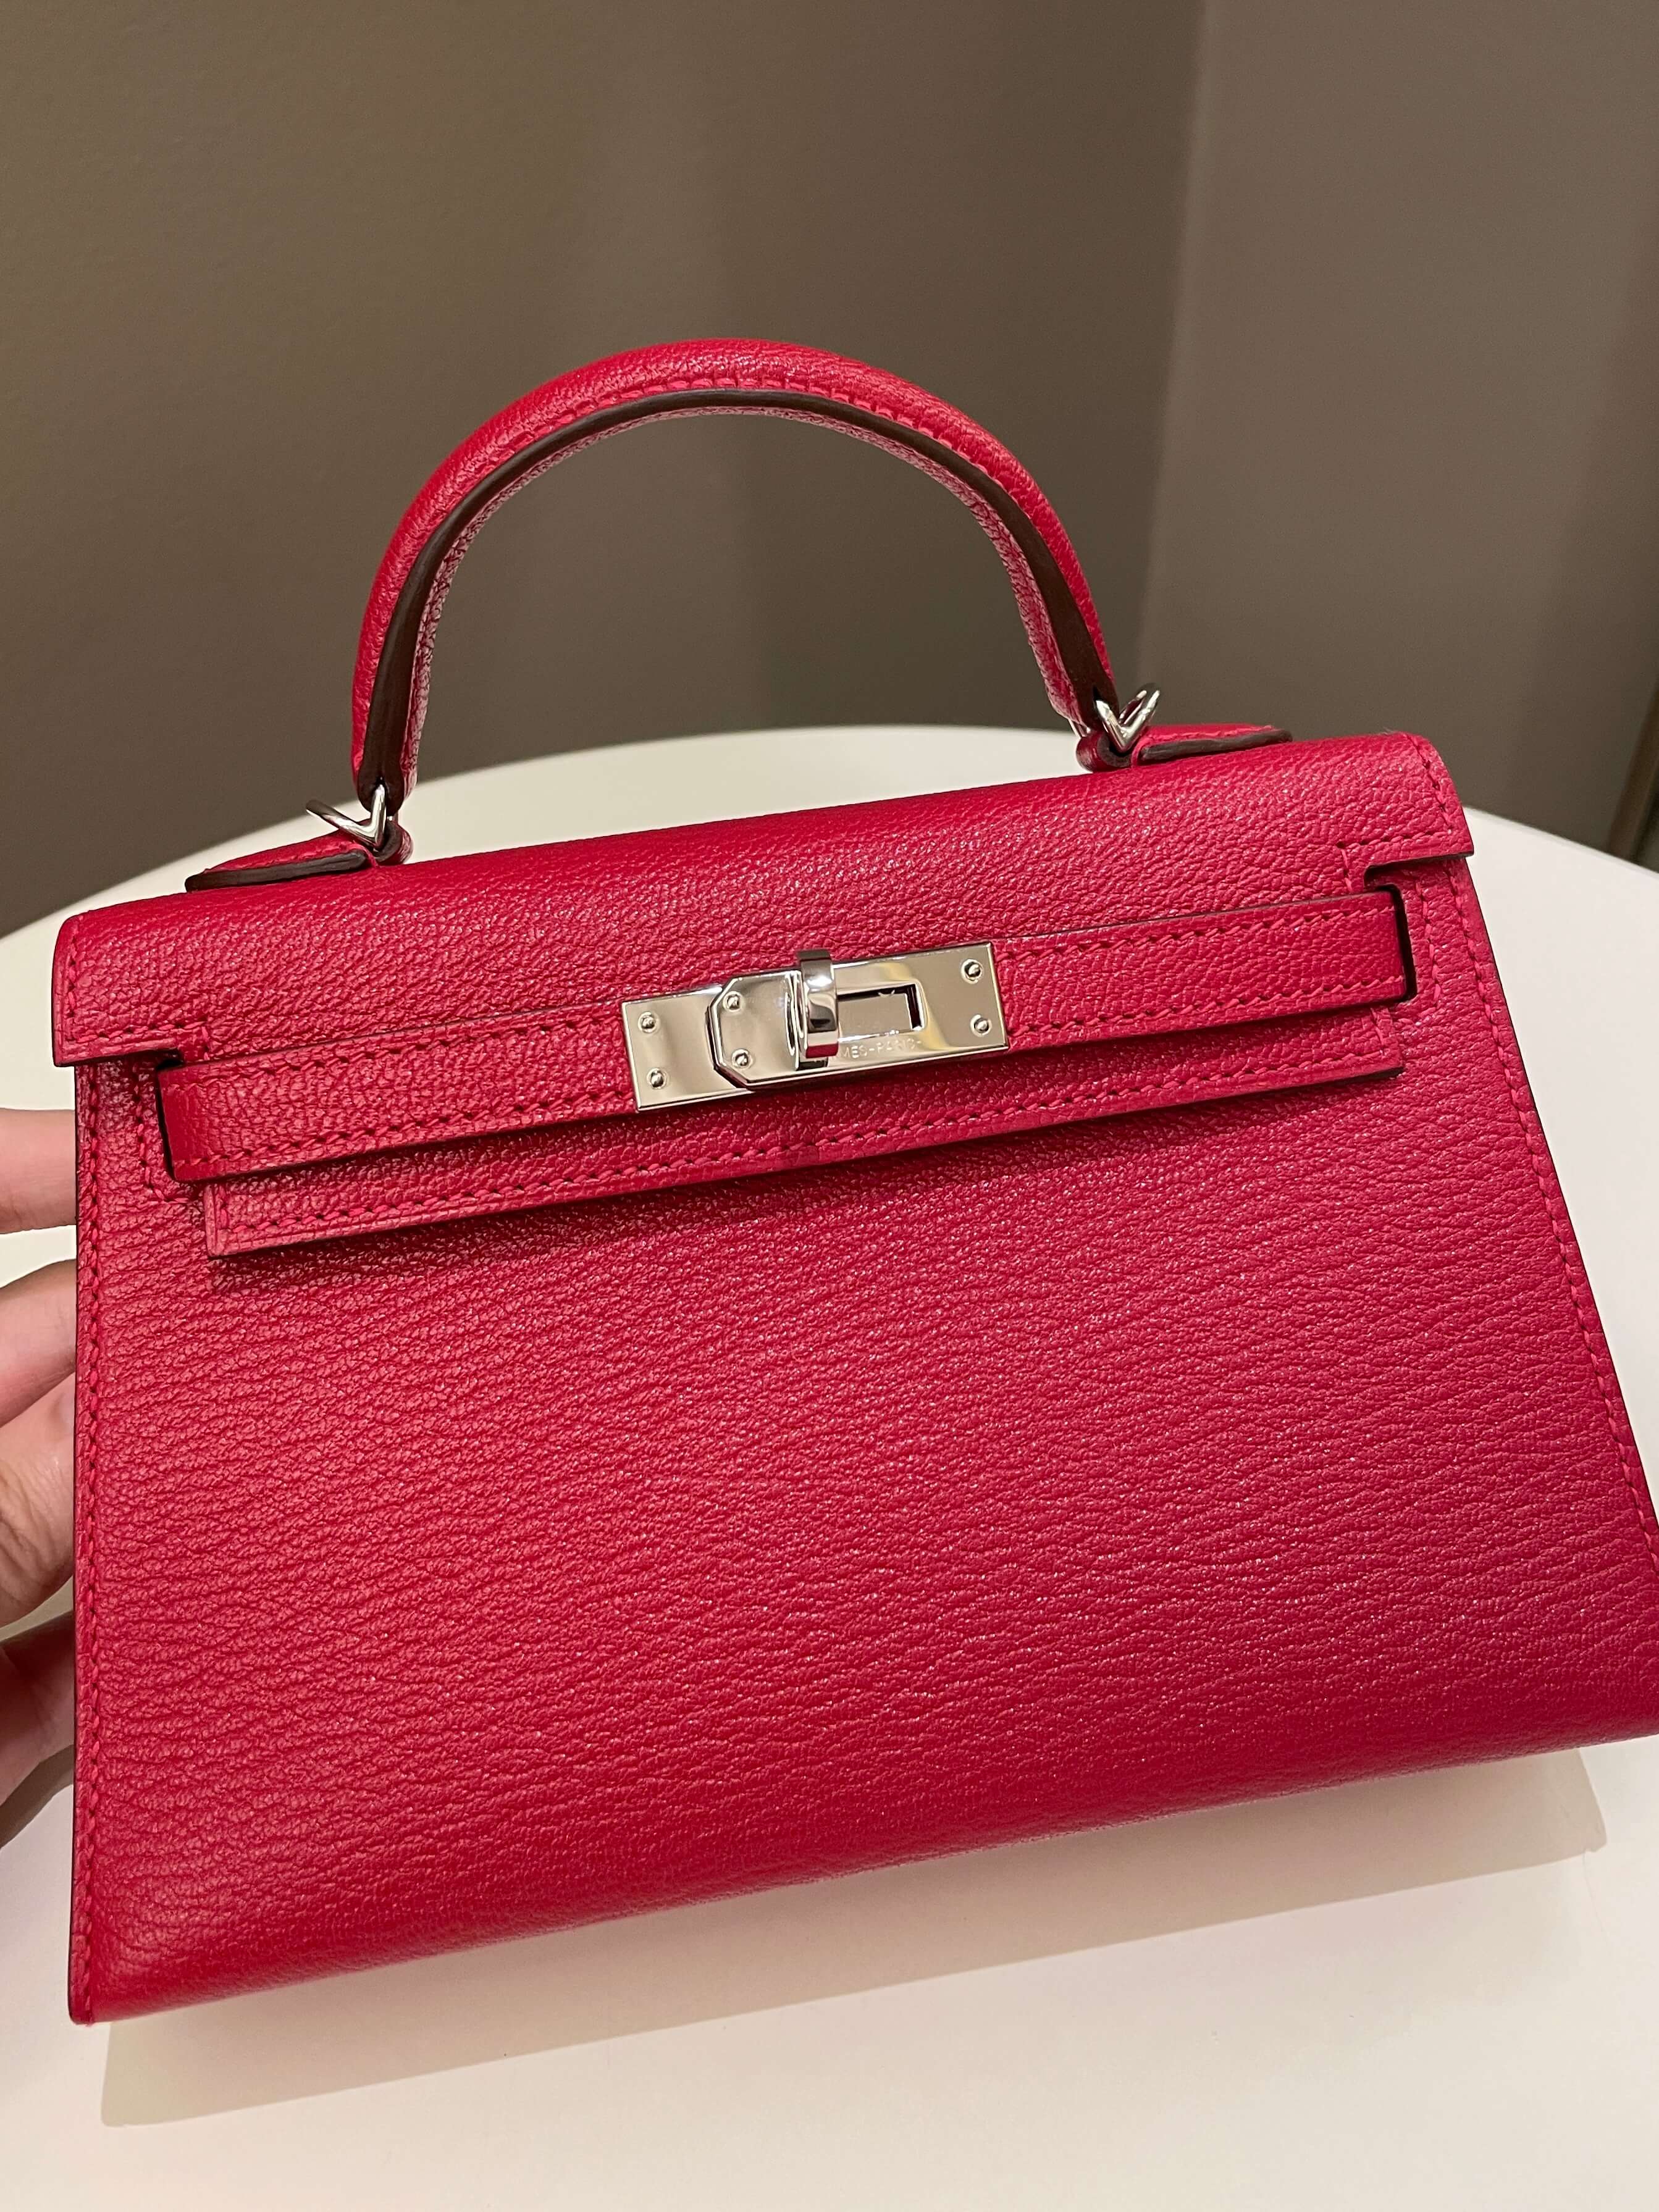 ln stock Mini Kelly Chevre Rouge Casaque With PHW @kellybags2727